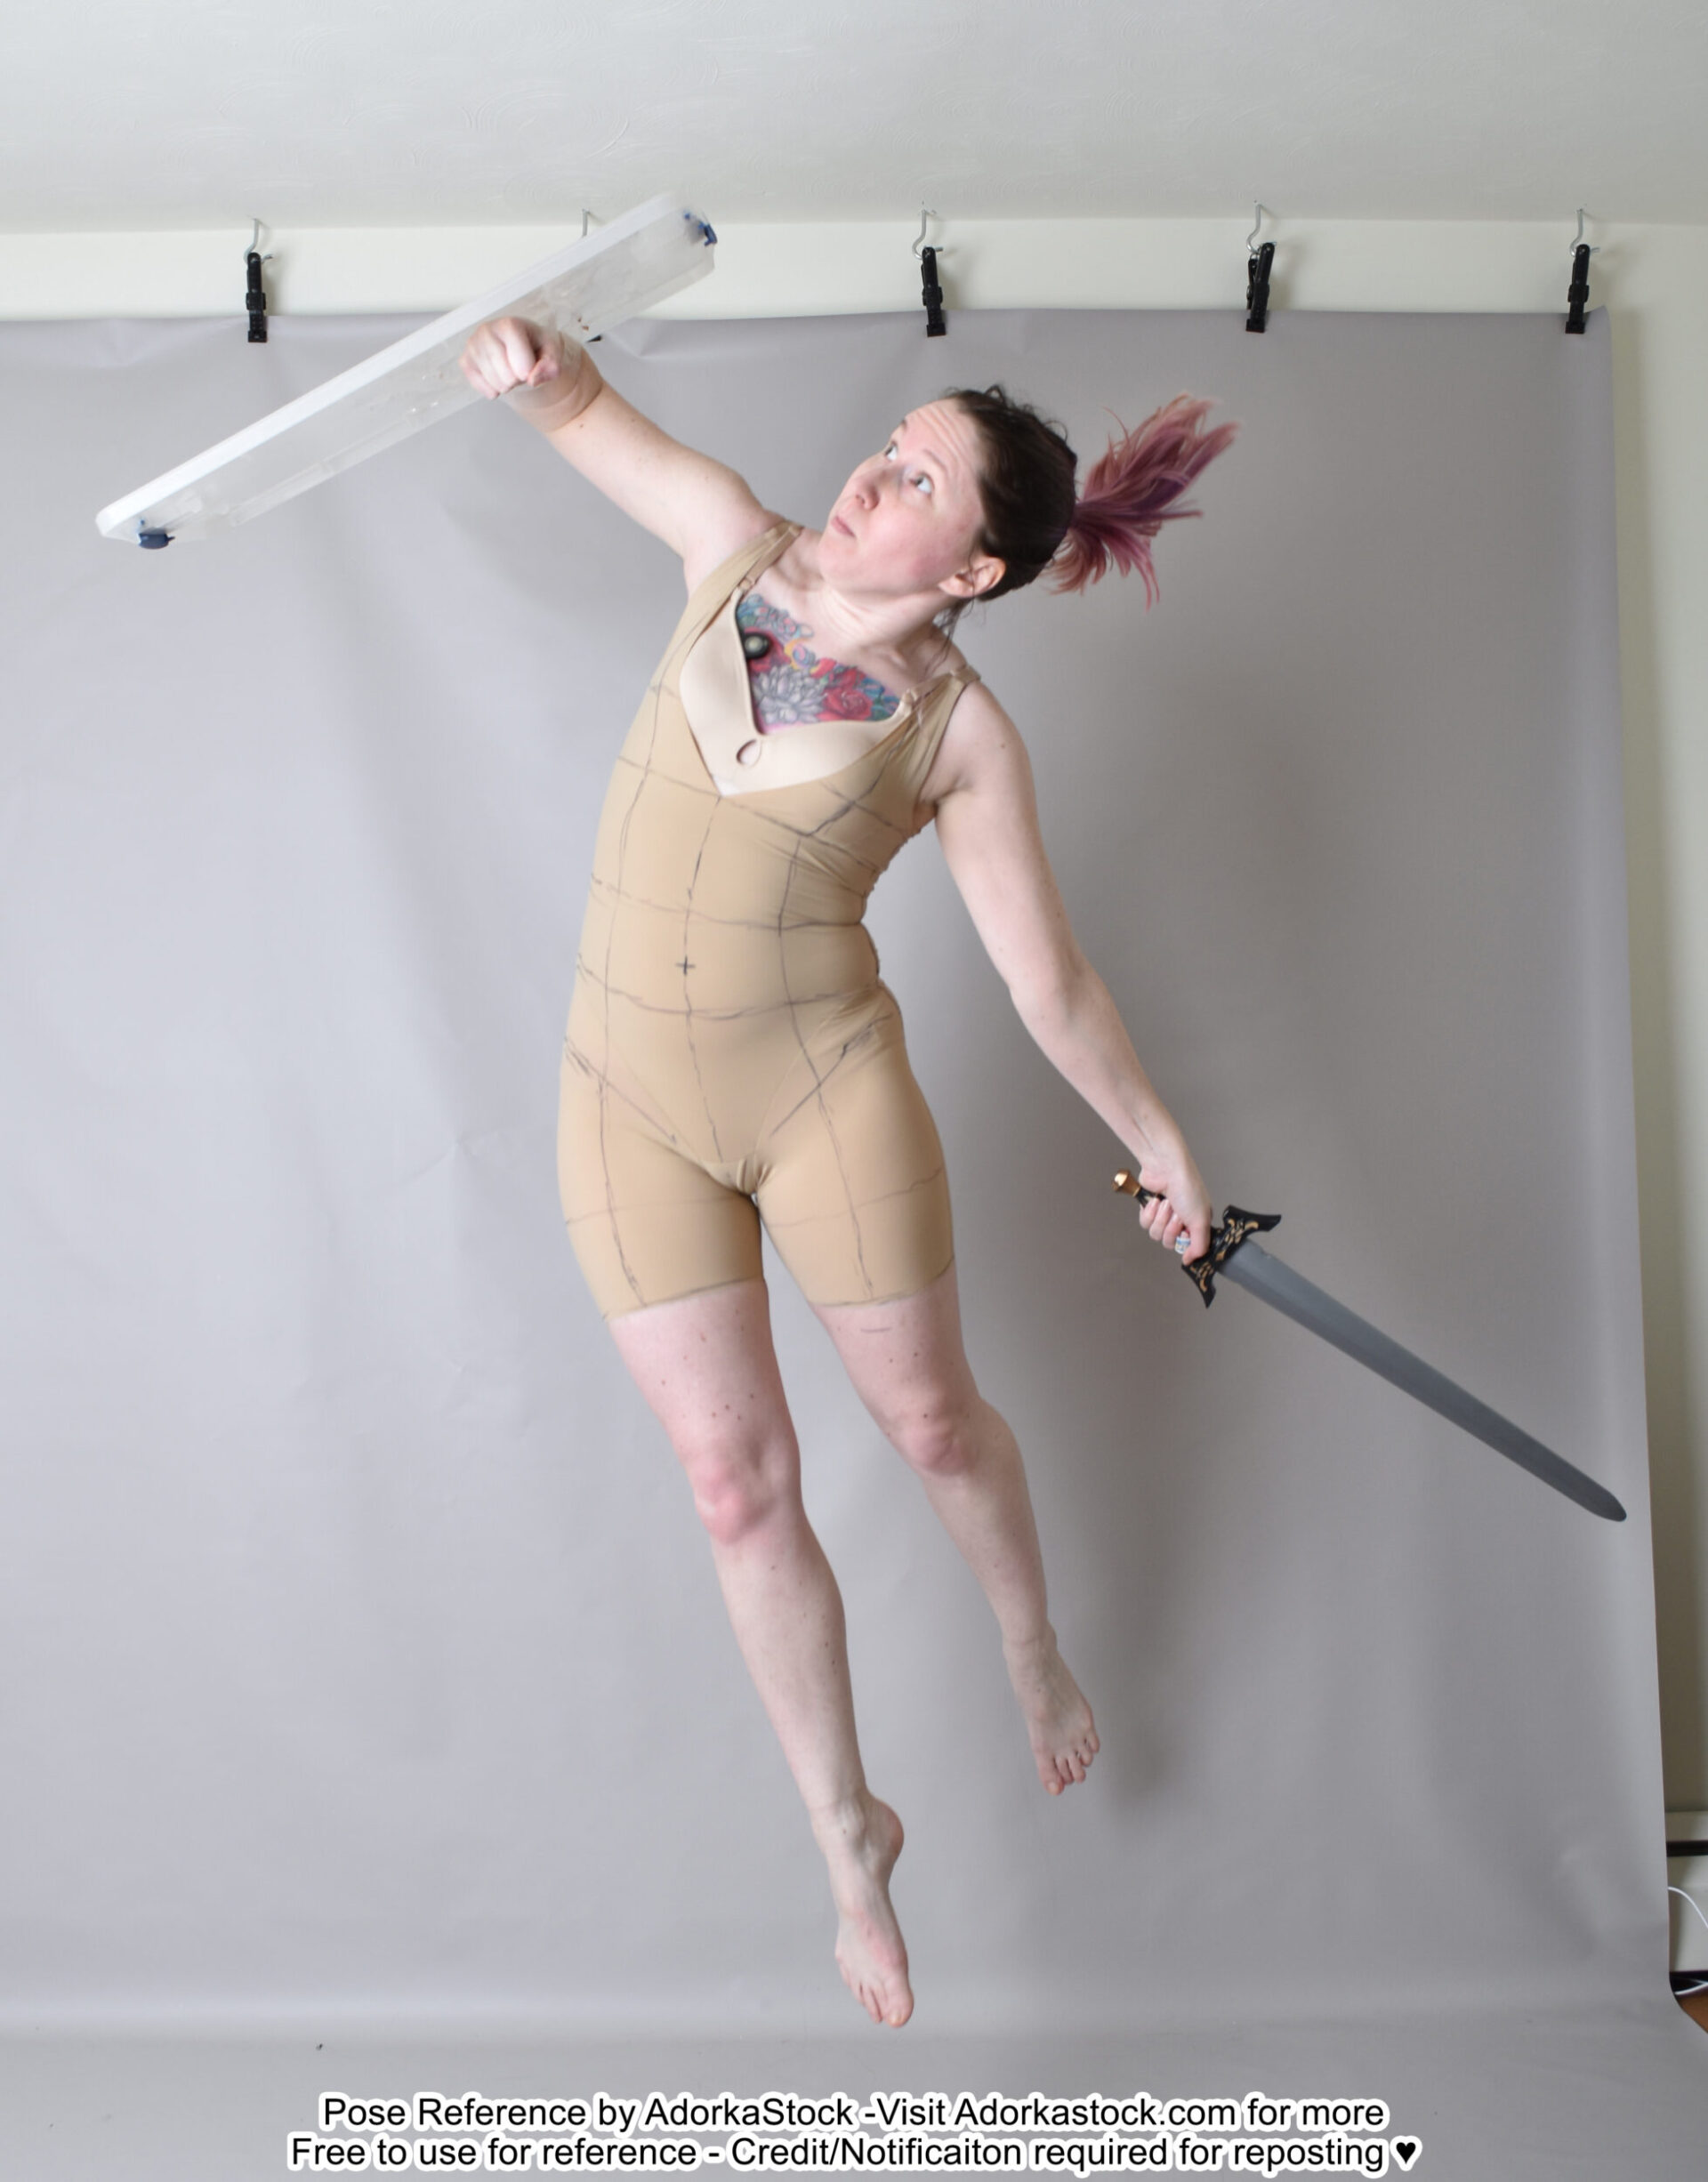 Thin, white, female pose reference model in dynamic jumping pose with sword and shield.